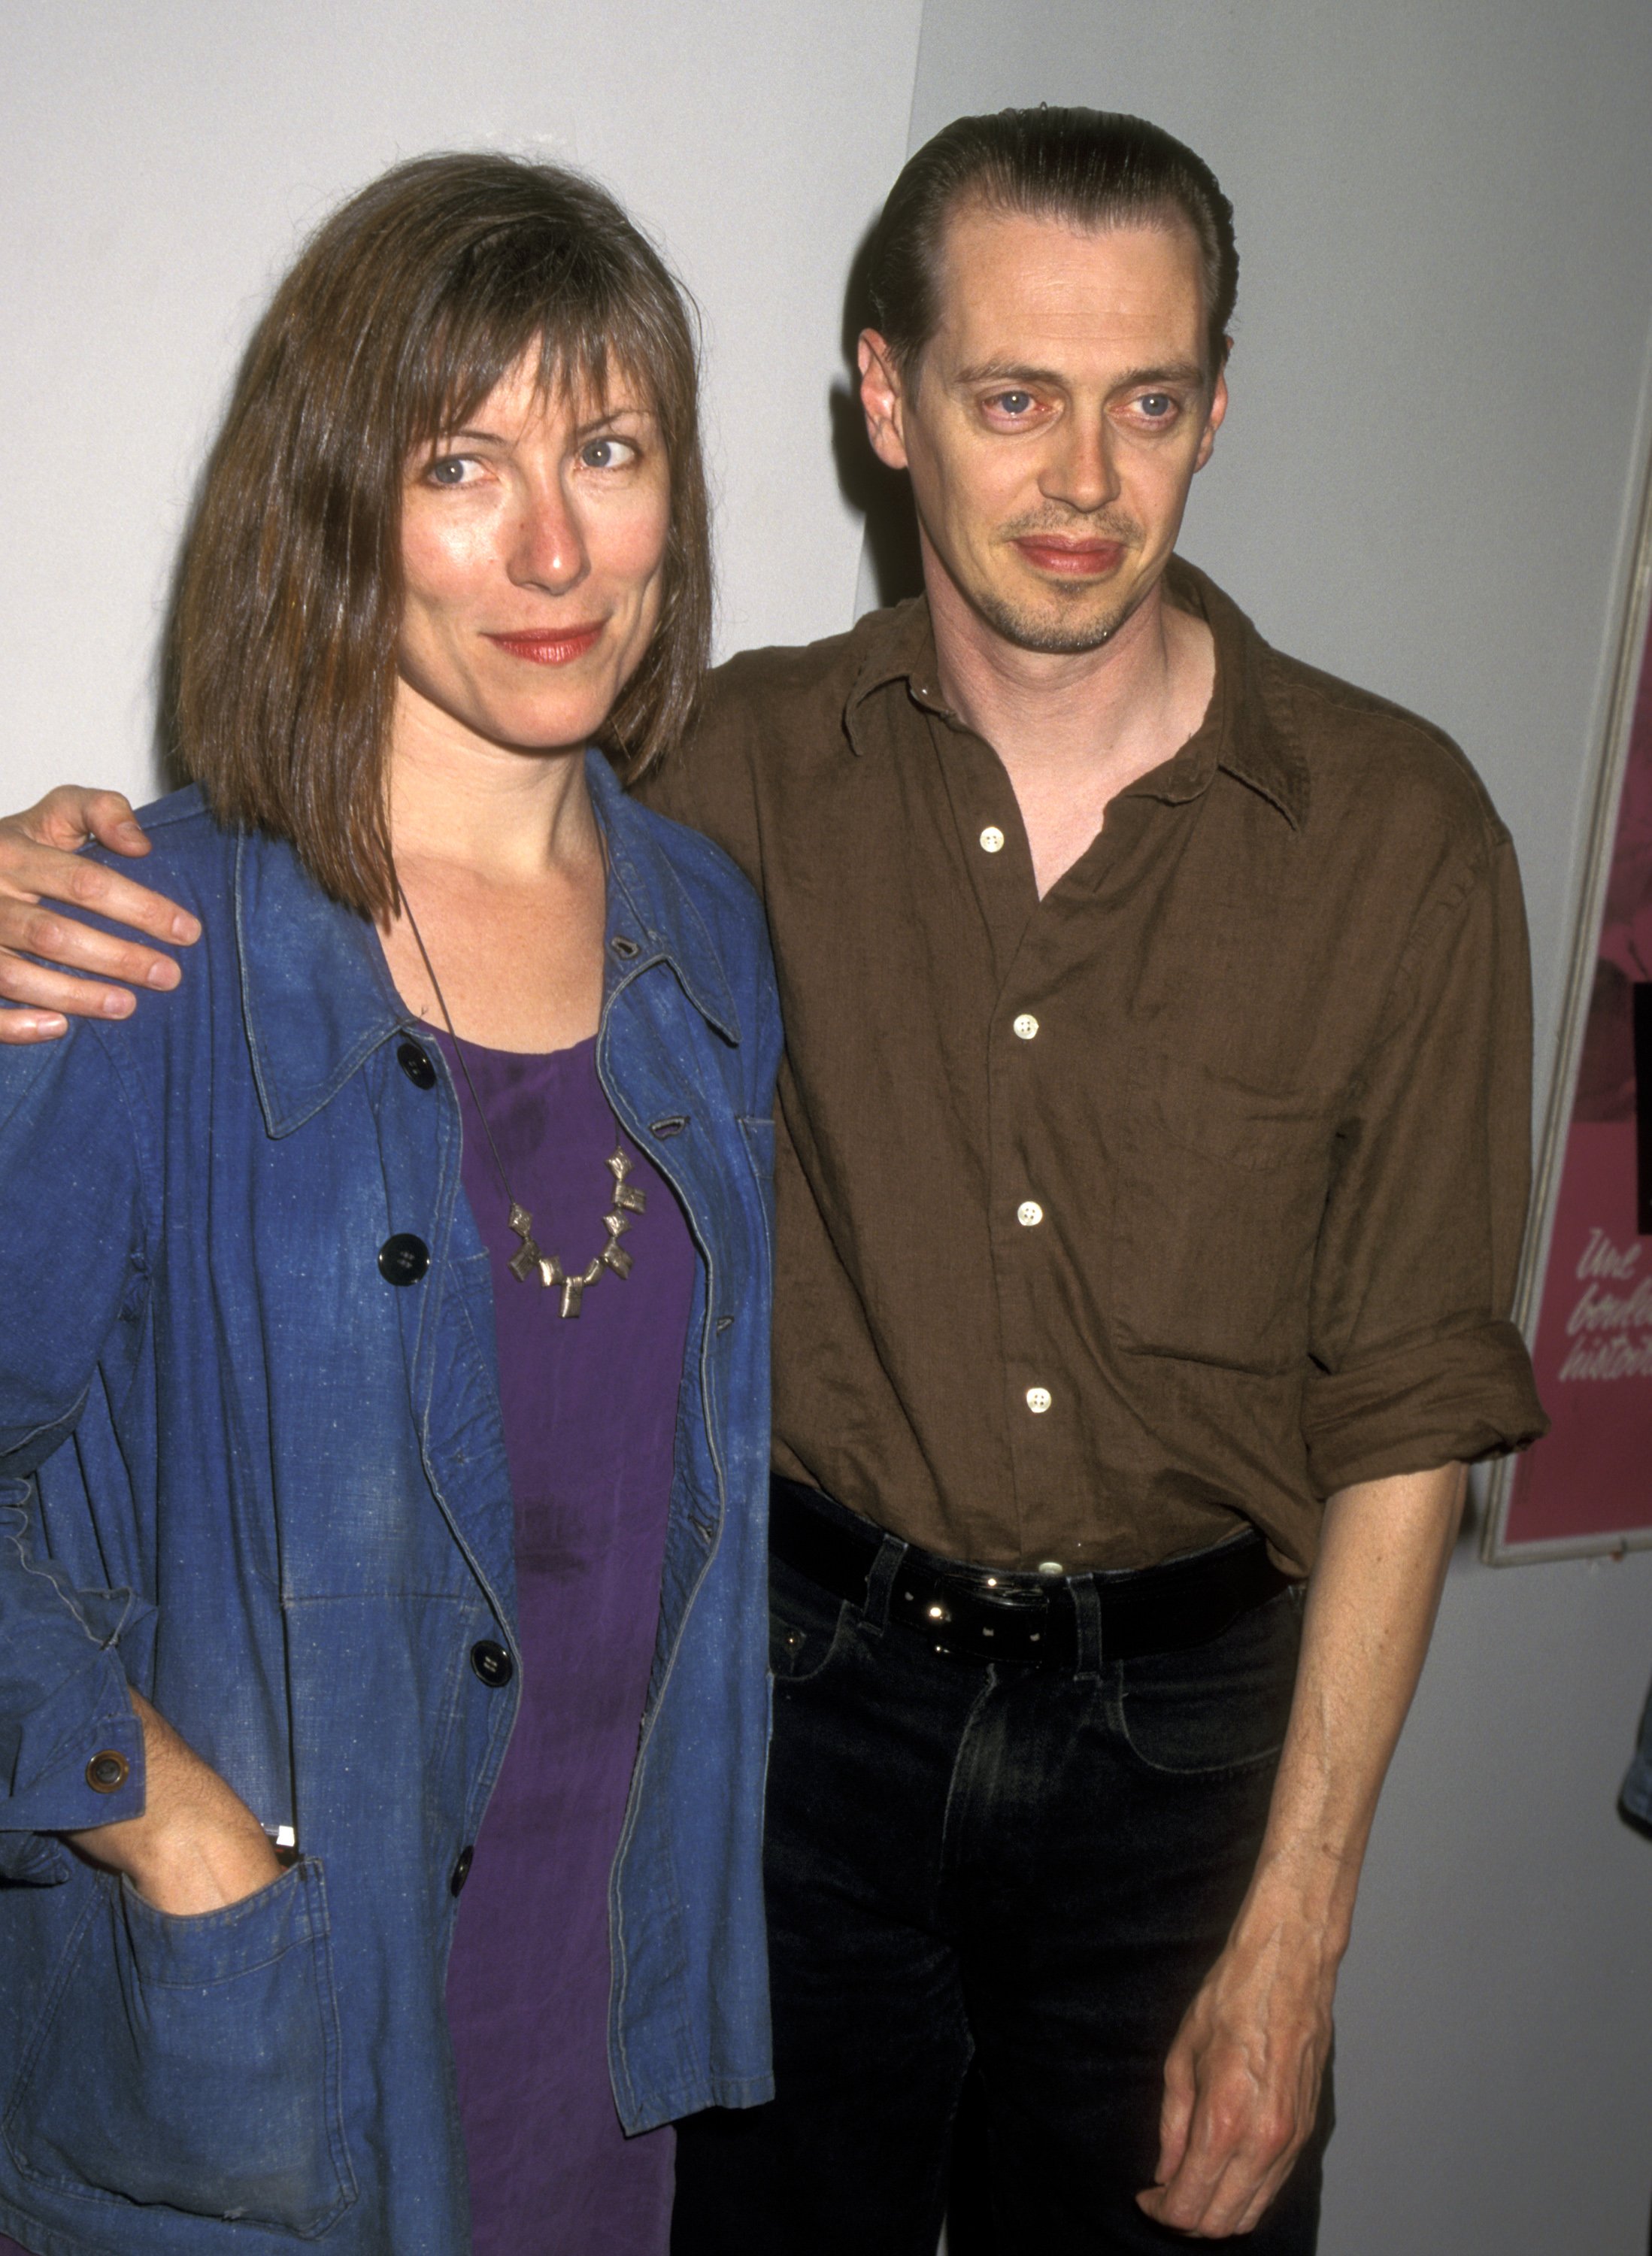 Steve Buscemi and wife Jo Andres attend the premiere of "Living in Oblivion" on July 11, 1995 at Angelka 57 Theater in Hollywood, California | Source: Getty Images 